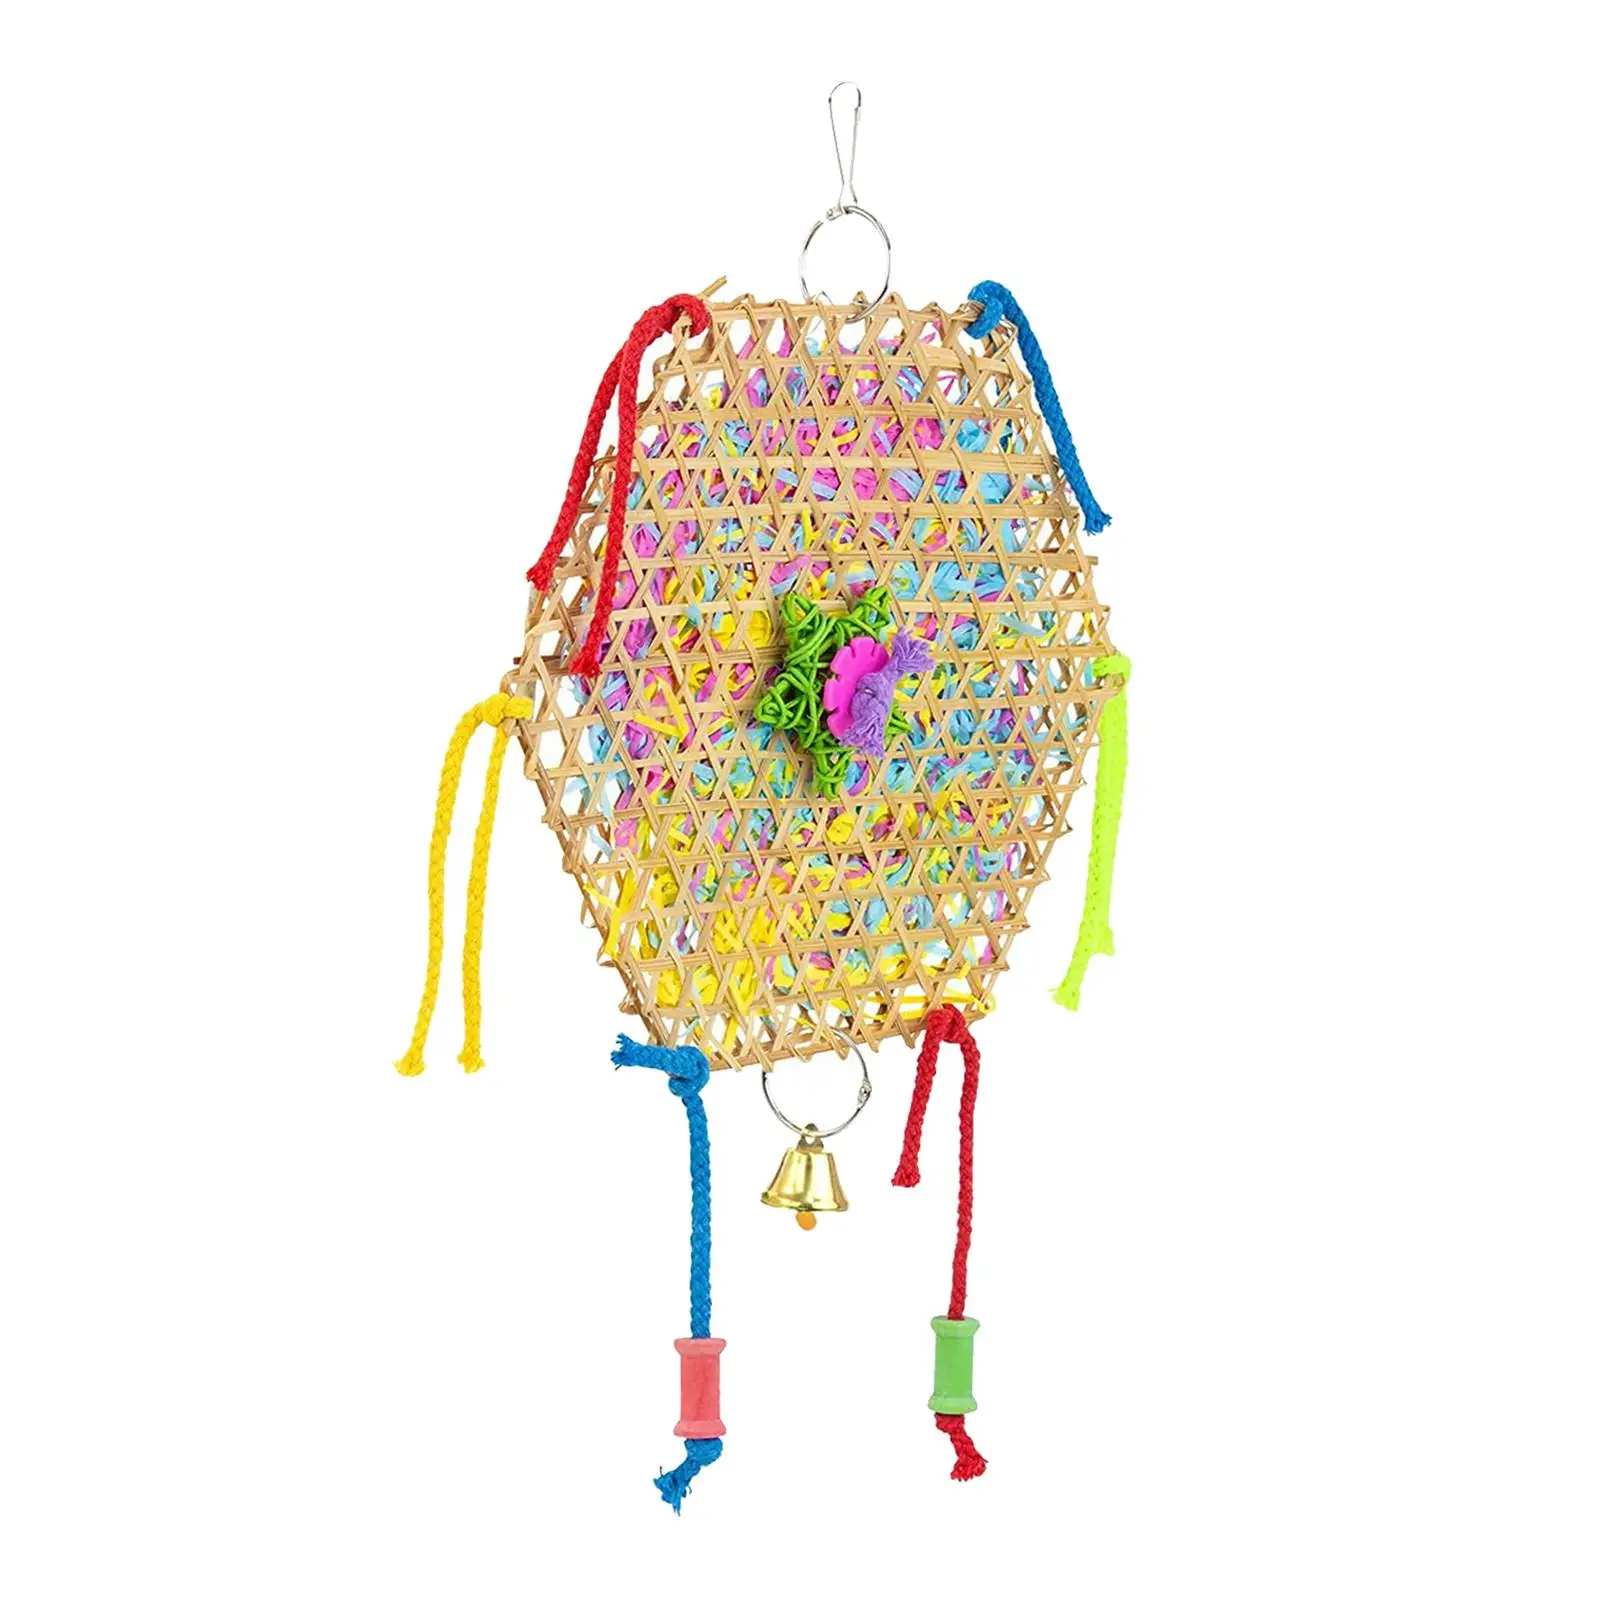 Parrot Toy Swing Parrot Cage Bite Toys for Parrotlets Lovebirds Cockatiels